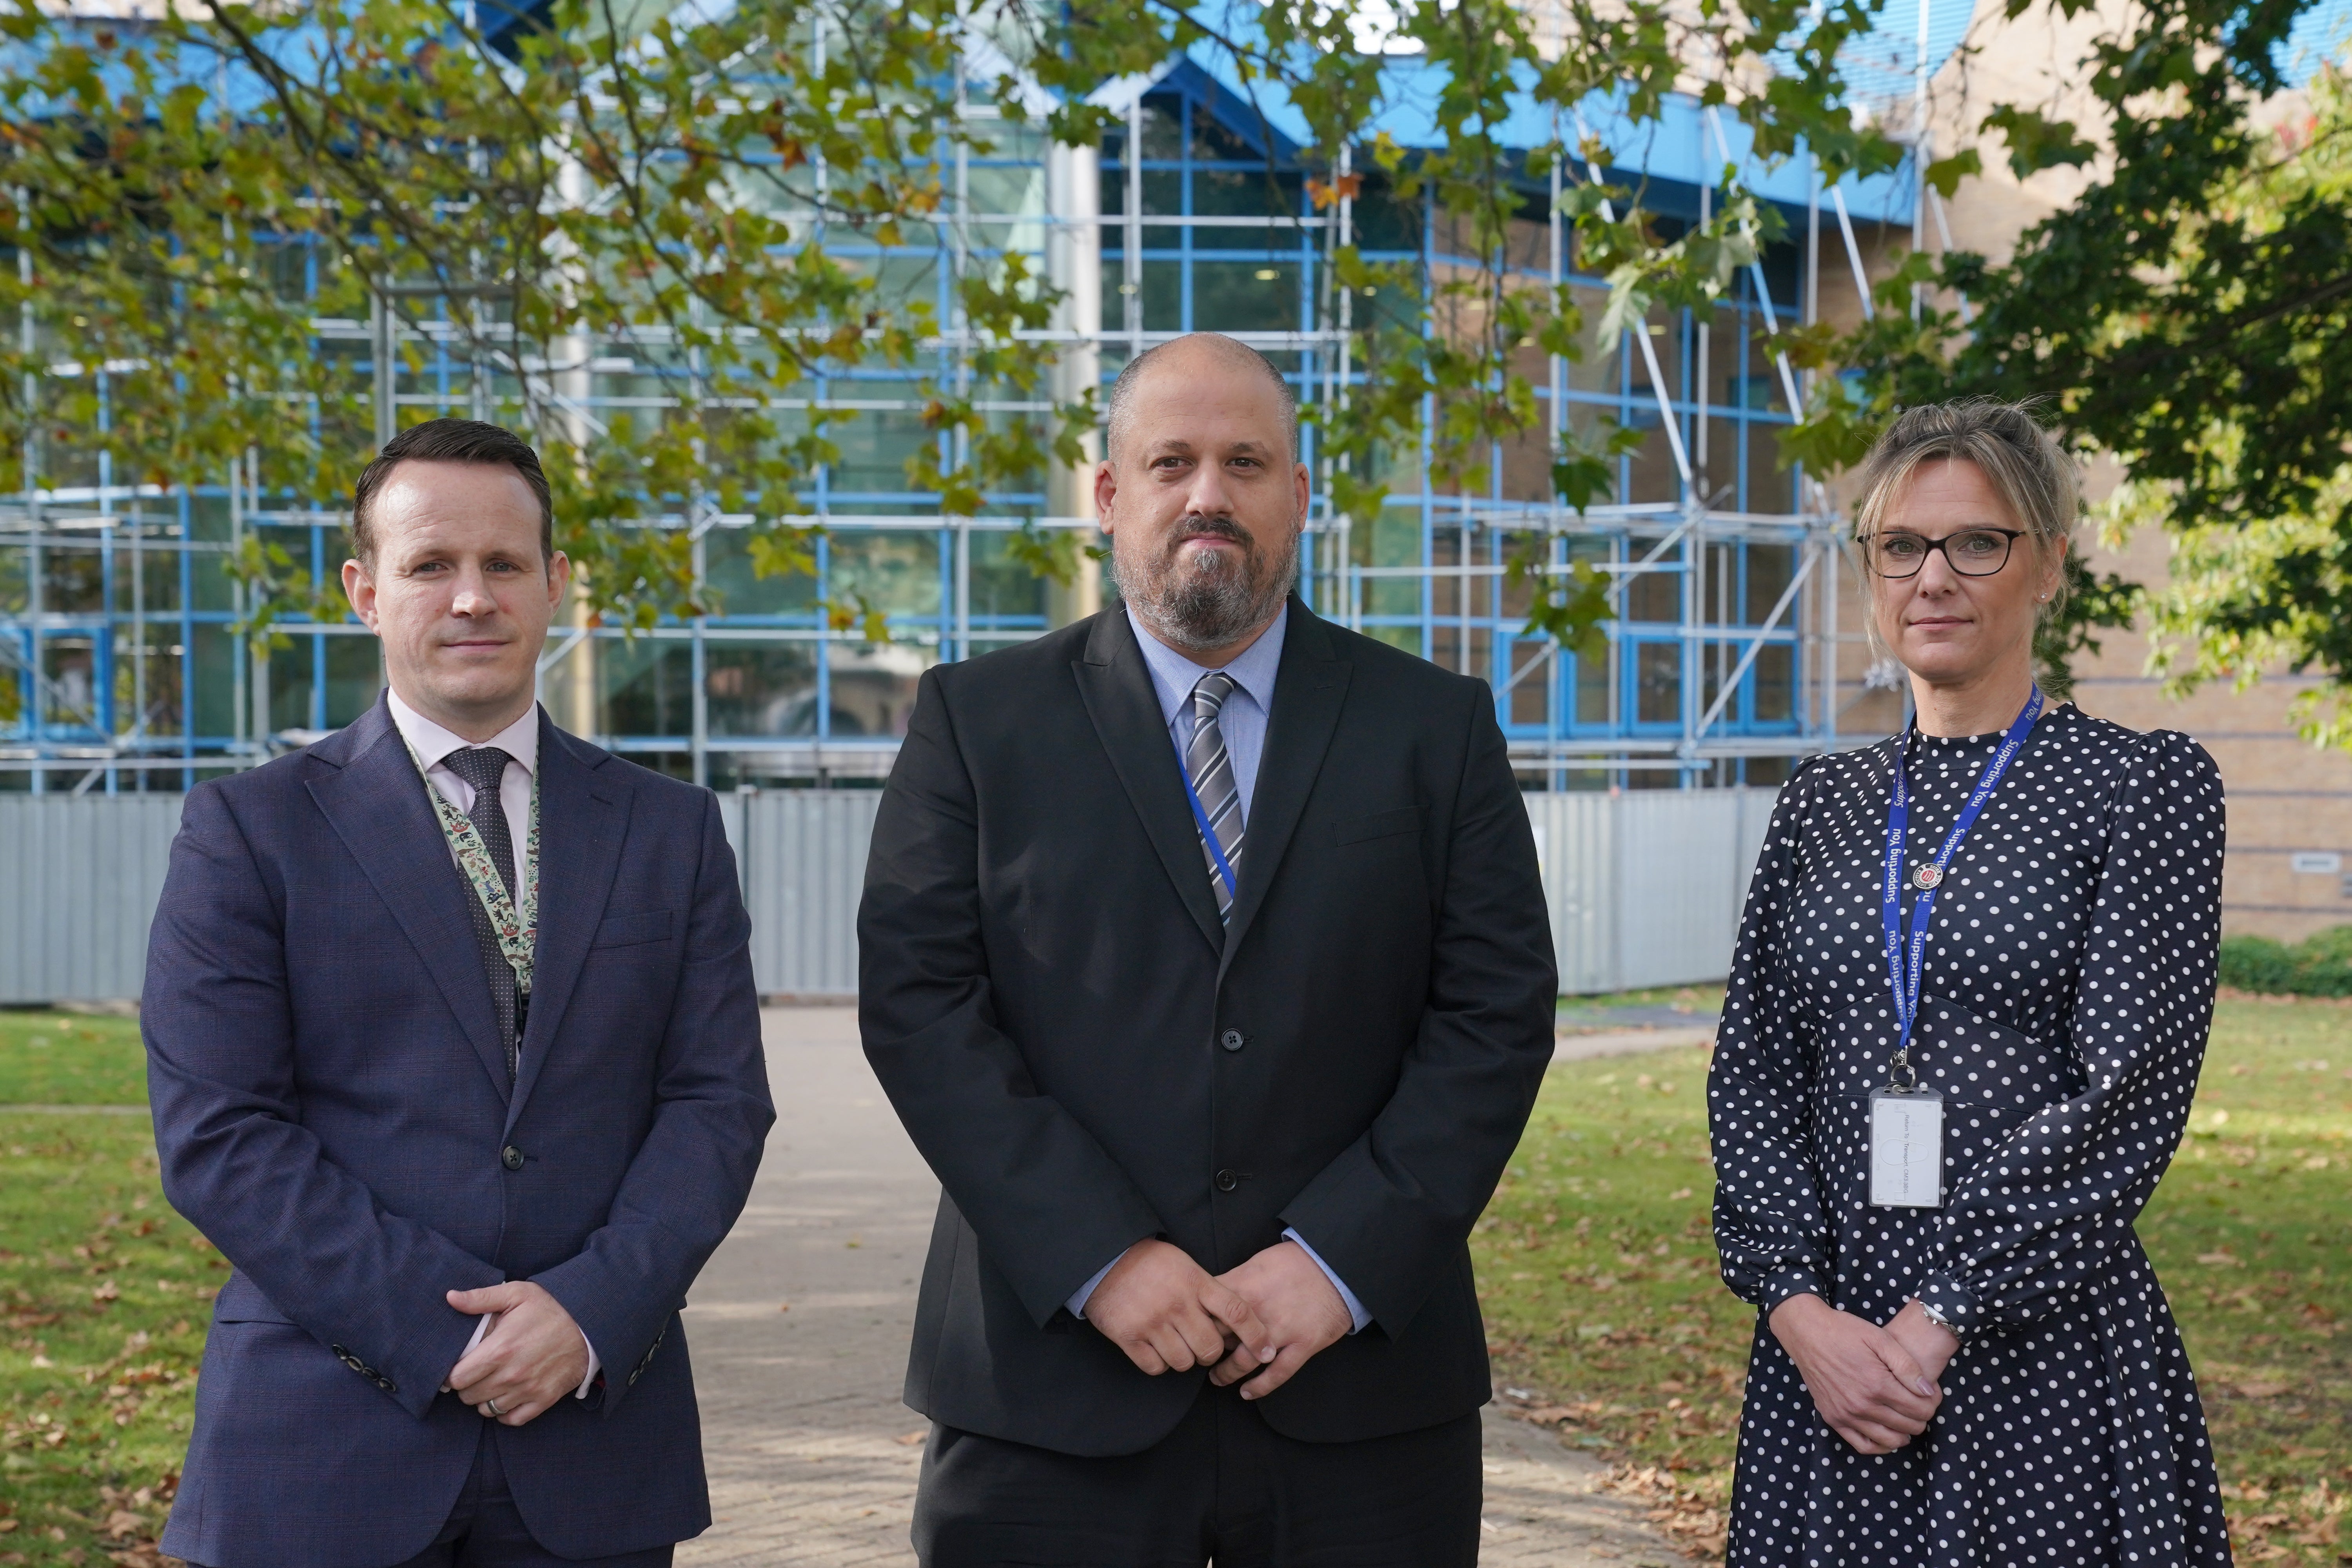 Detective Sergeant Ben Rushmere, Detective Constable Steven Tilley and Detective Constable Hayley Langmead, all of Essex Police, outside Basildon Combined Court in Essex